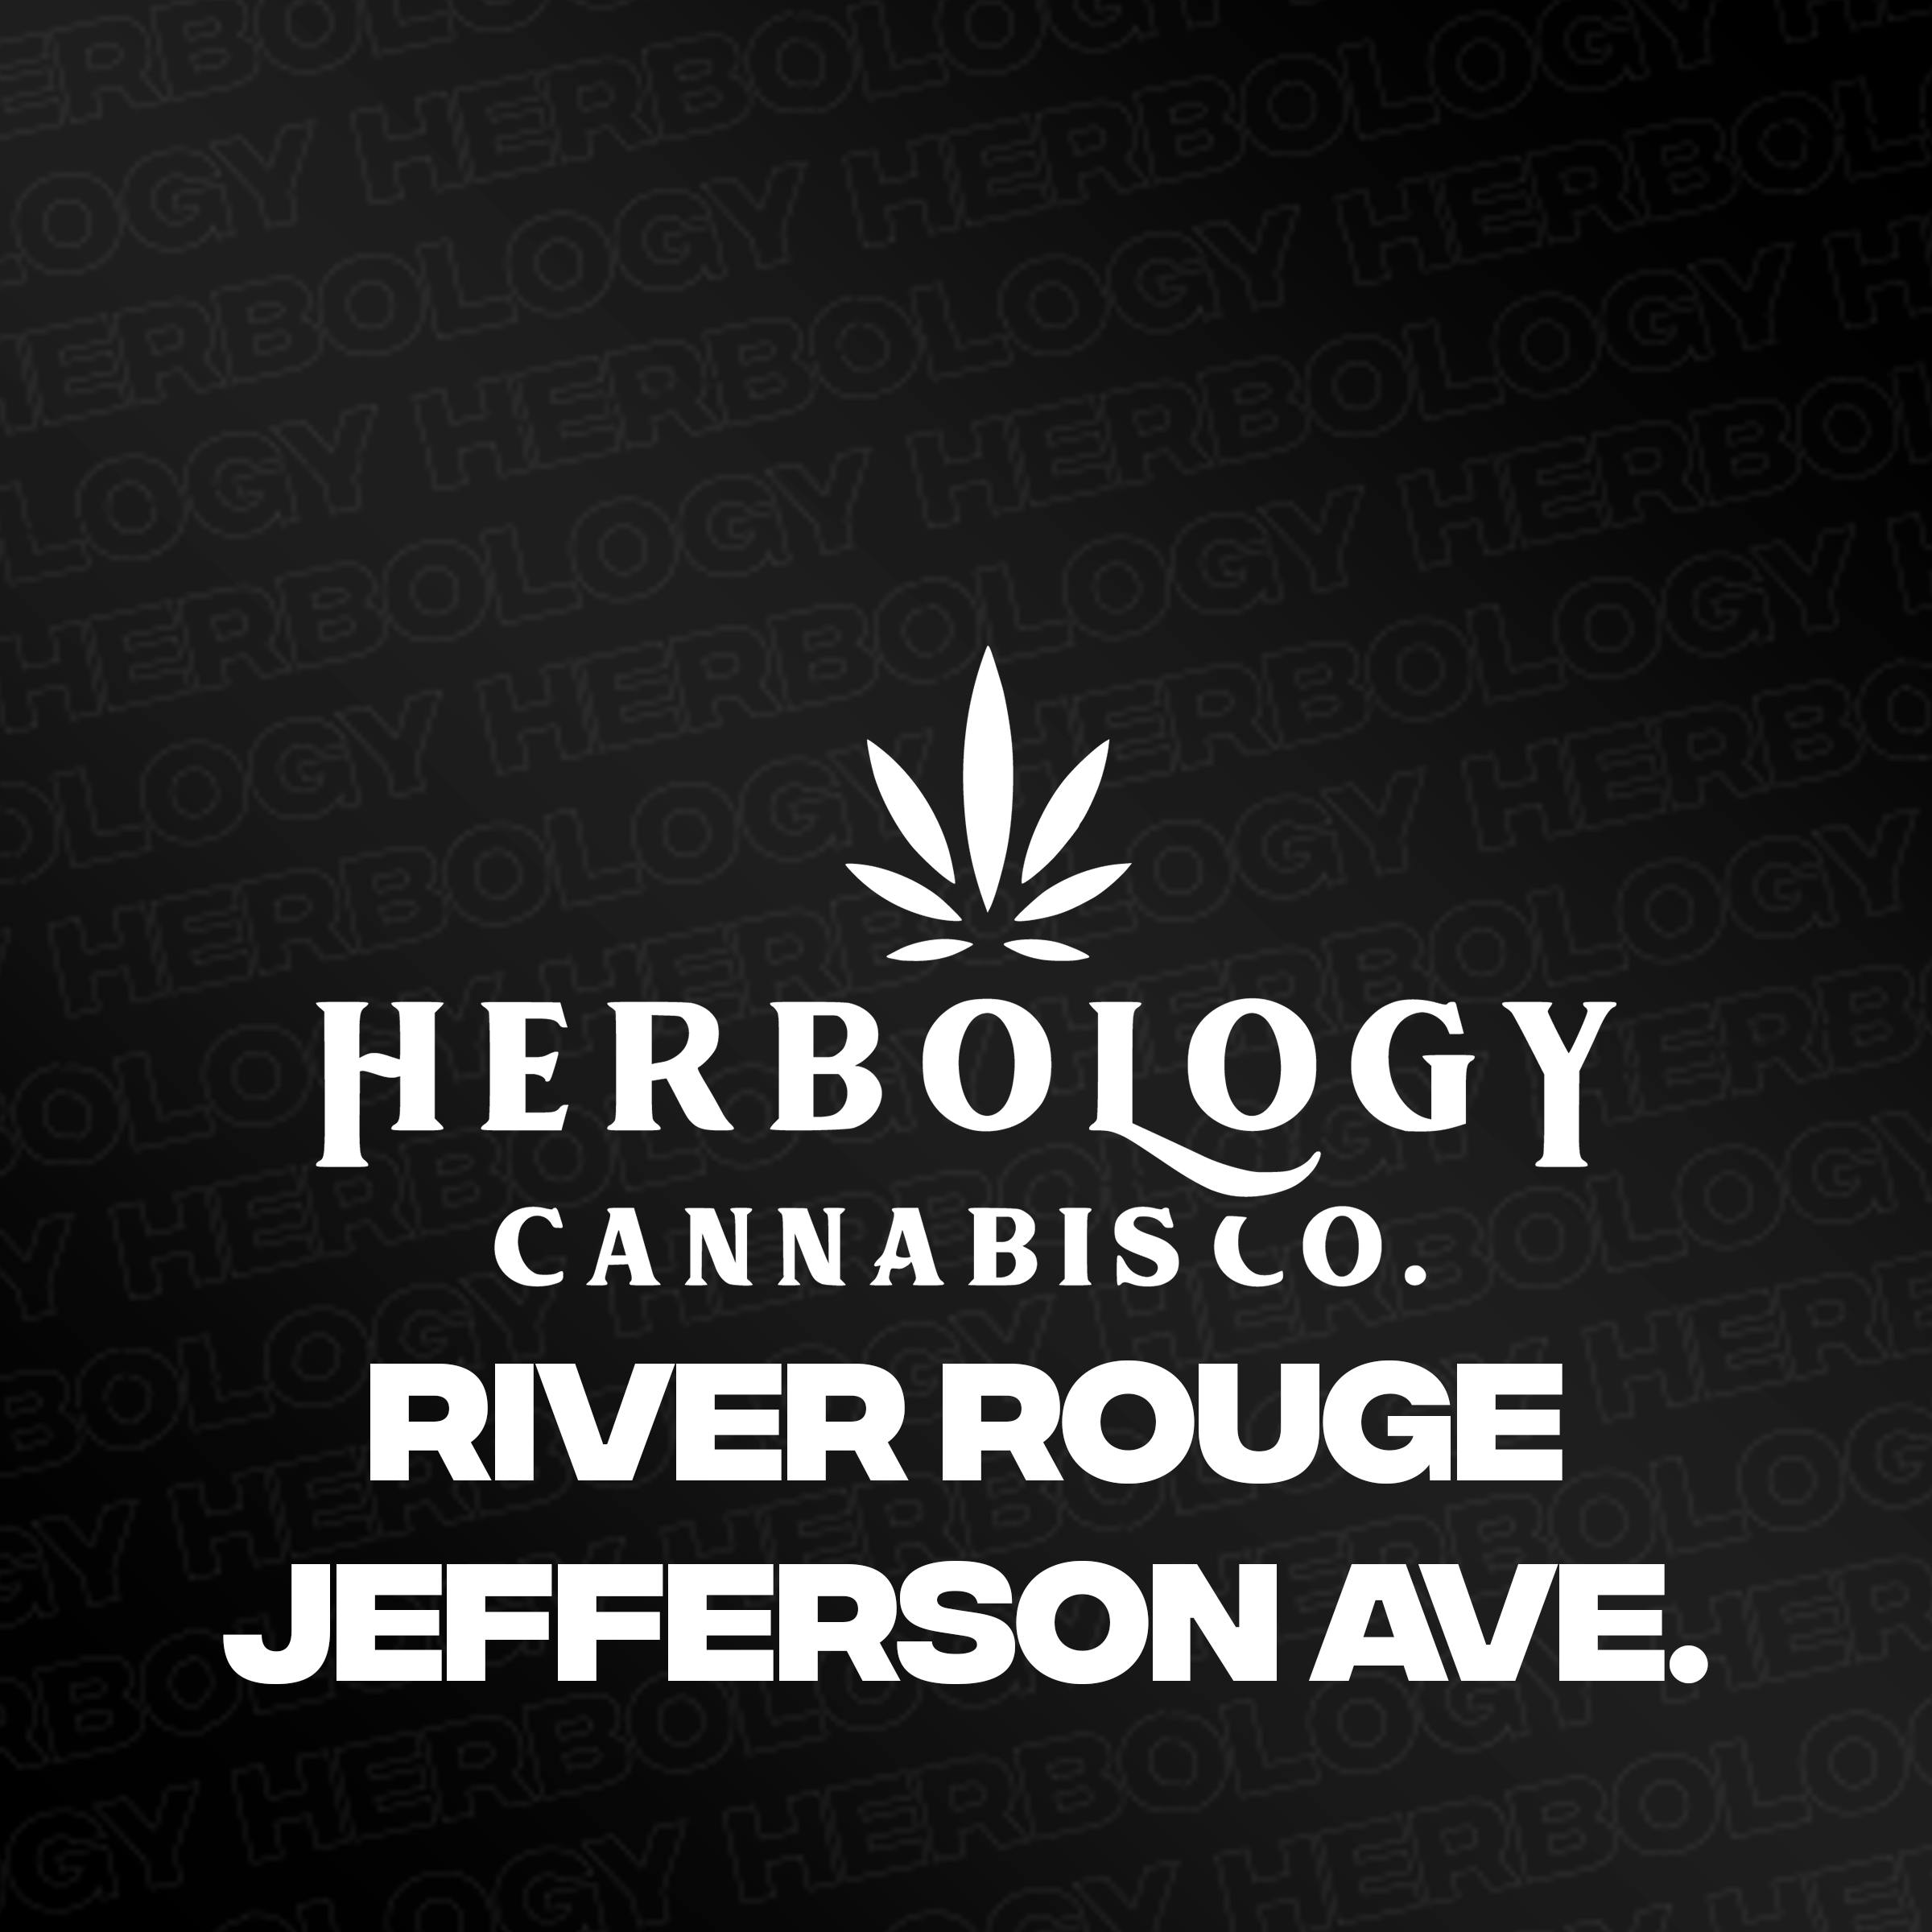 Herbology Cannabis Co. River Rouge - Jefferson Ave. - Recreational Cannabis Dispensary-logo